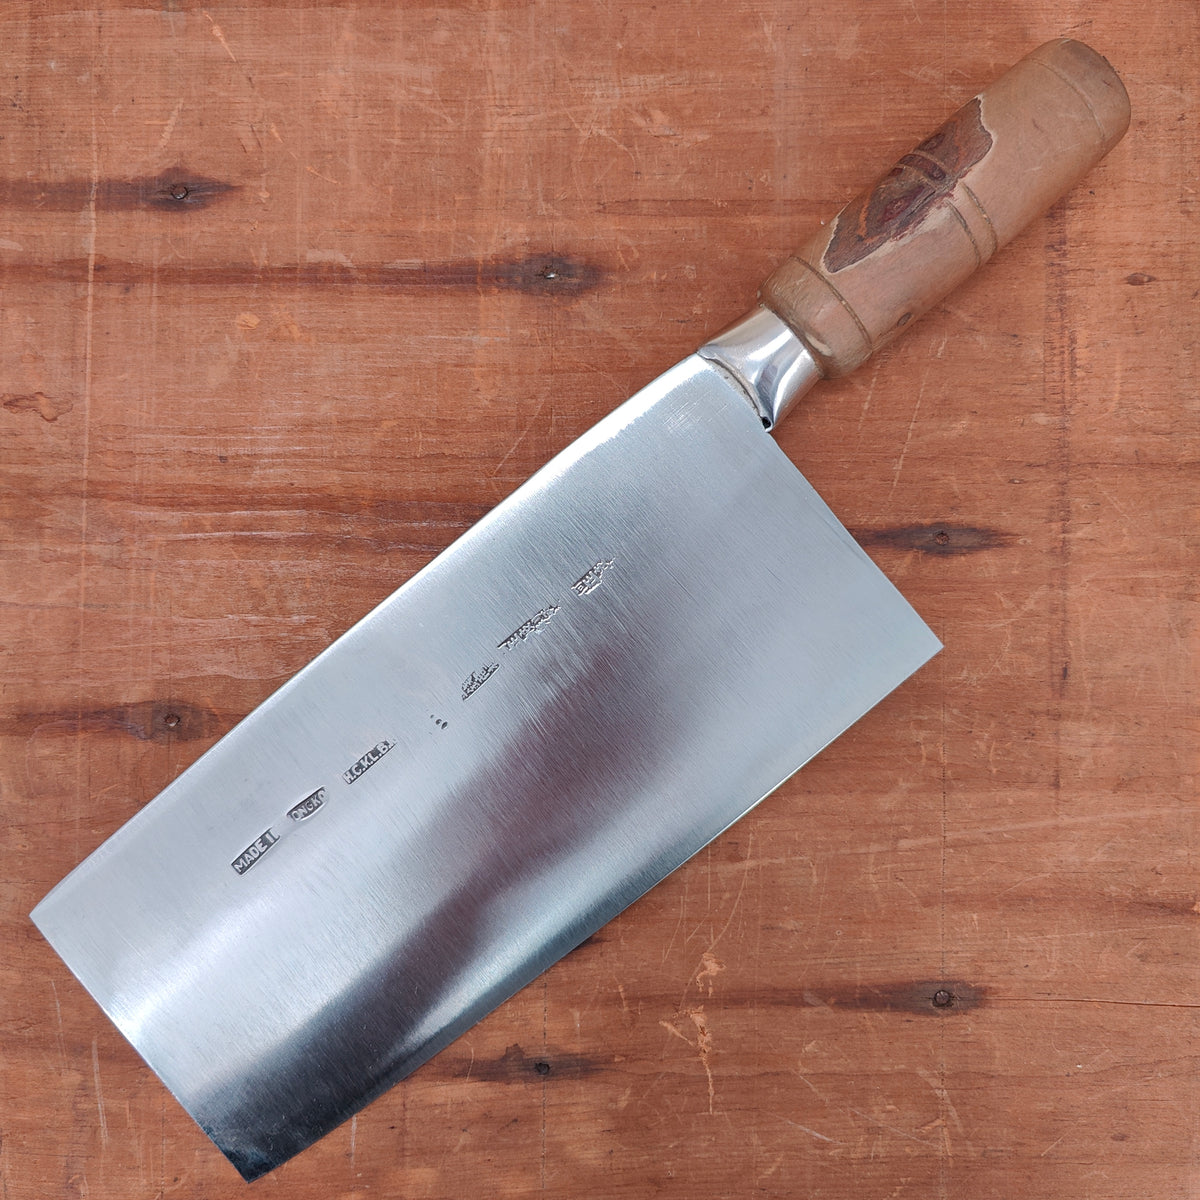 Ho Ching Kee Lee Chinese Cleaver Mid Weight Carbon Steel Hong Kong